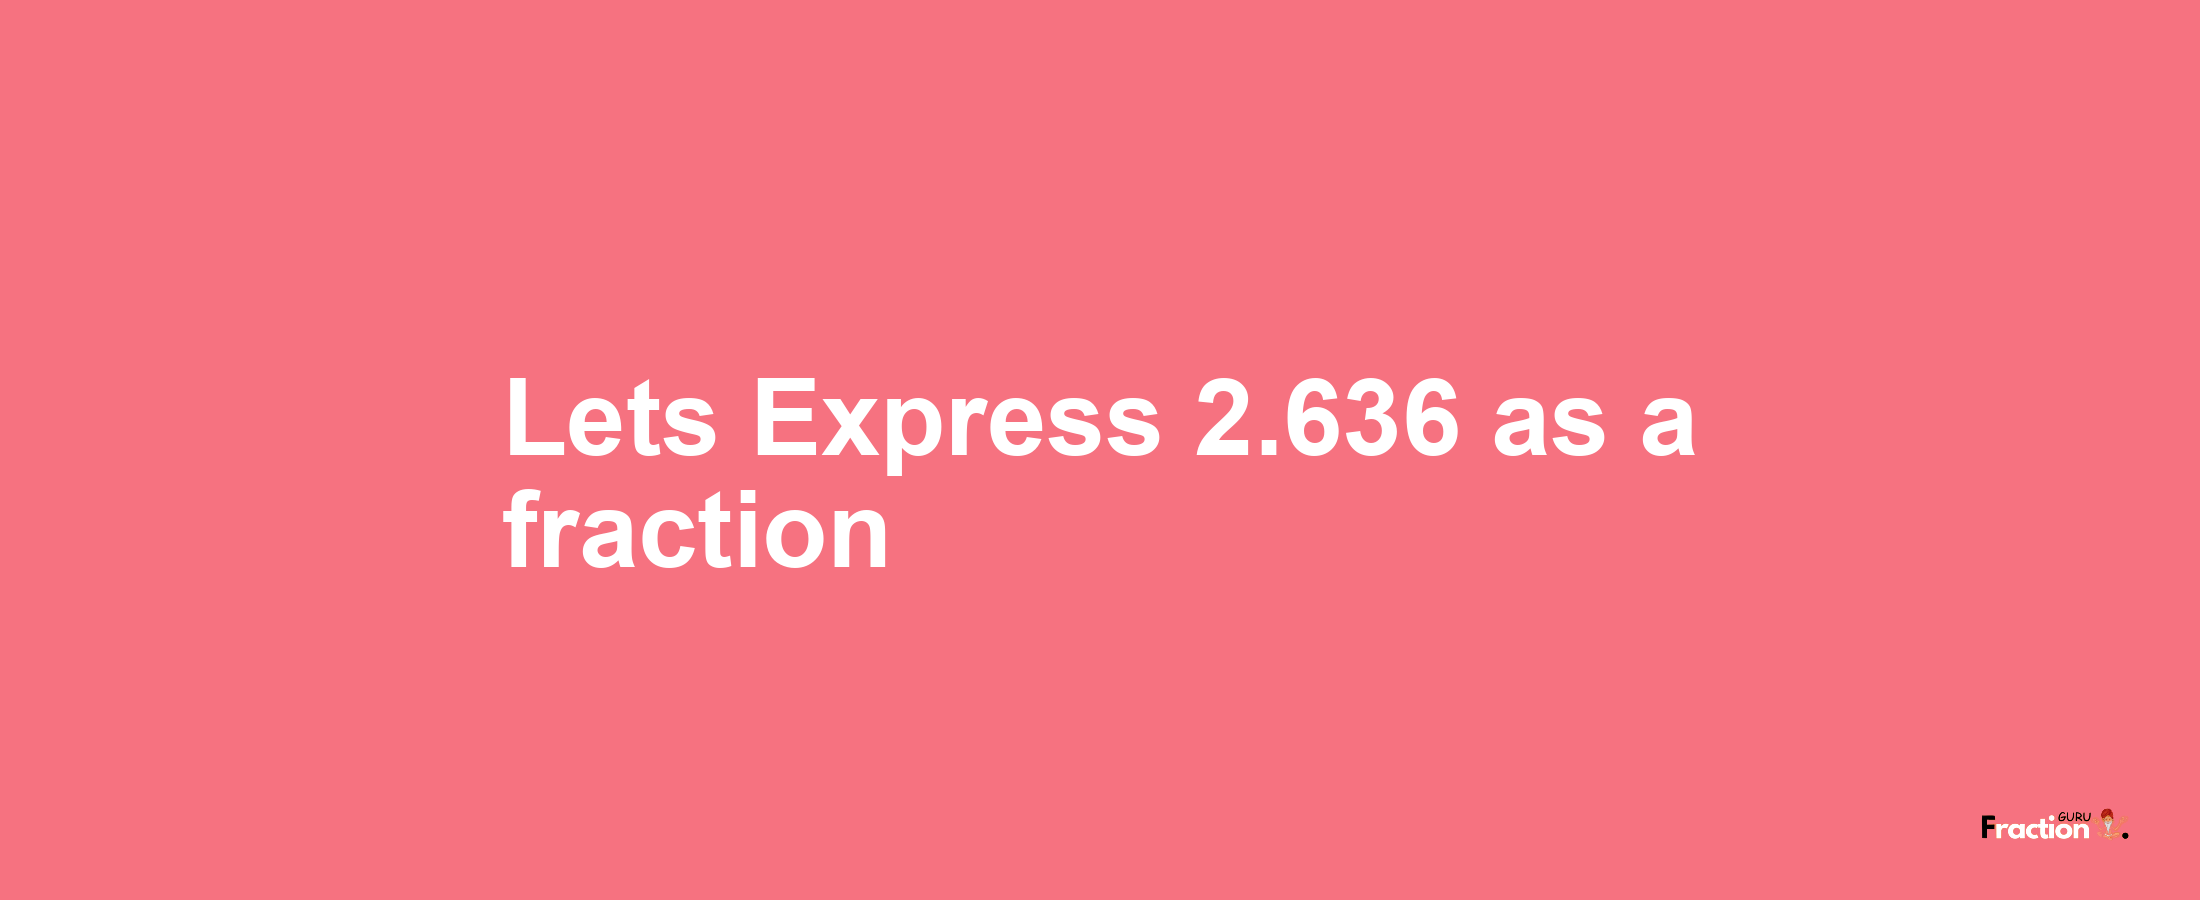 Lets Express 2.636 as afraction